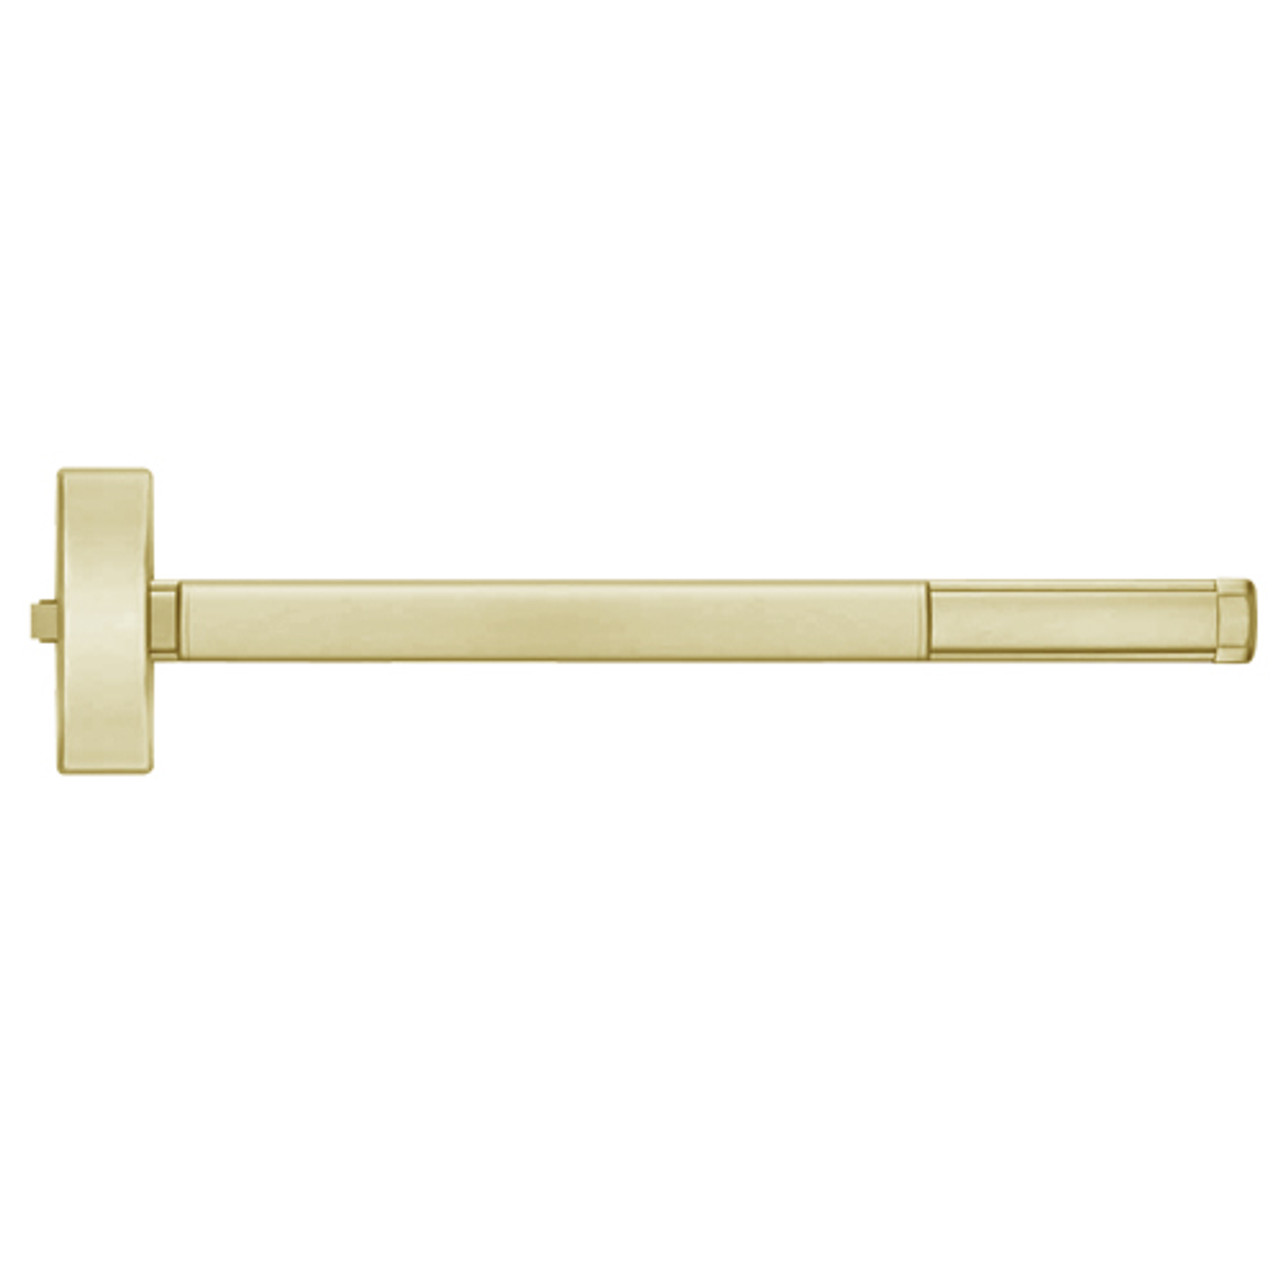 FL2115-606-36 PHI 2100 Series Fire Rated Apex Rim Exit Device Prepped for Thumb Piece Always Active in Satin Brass Finish